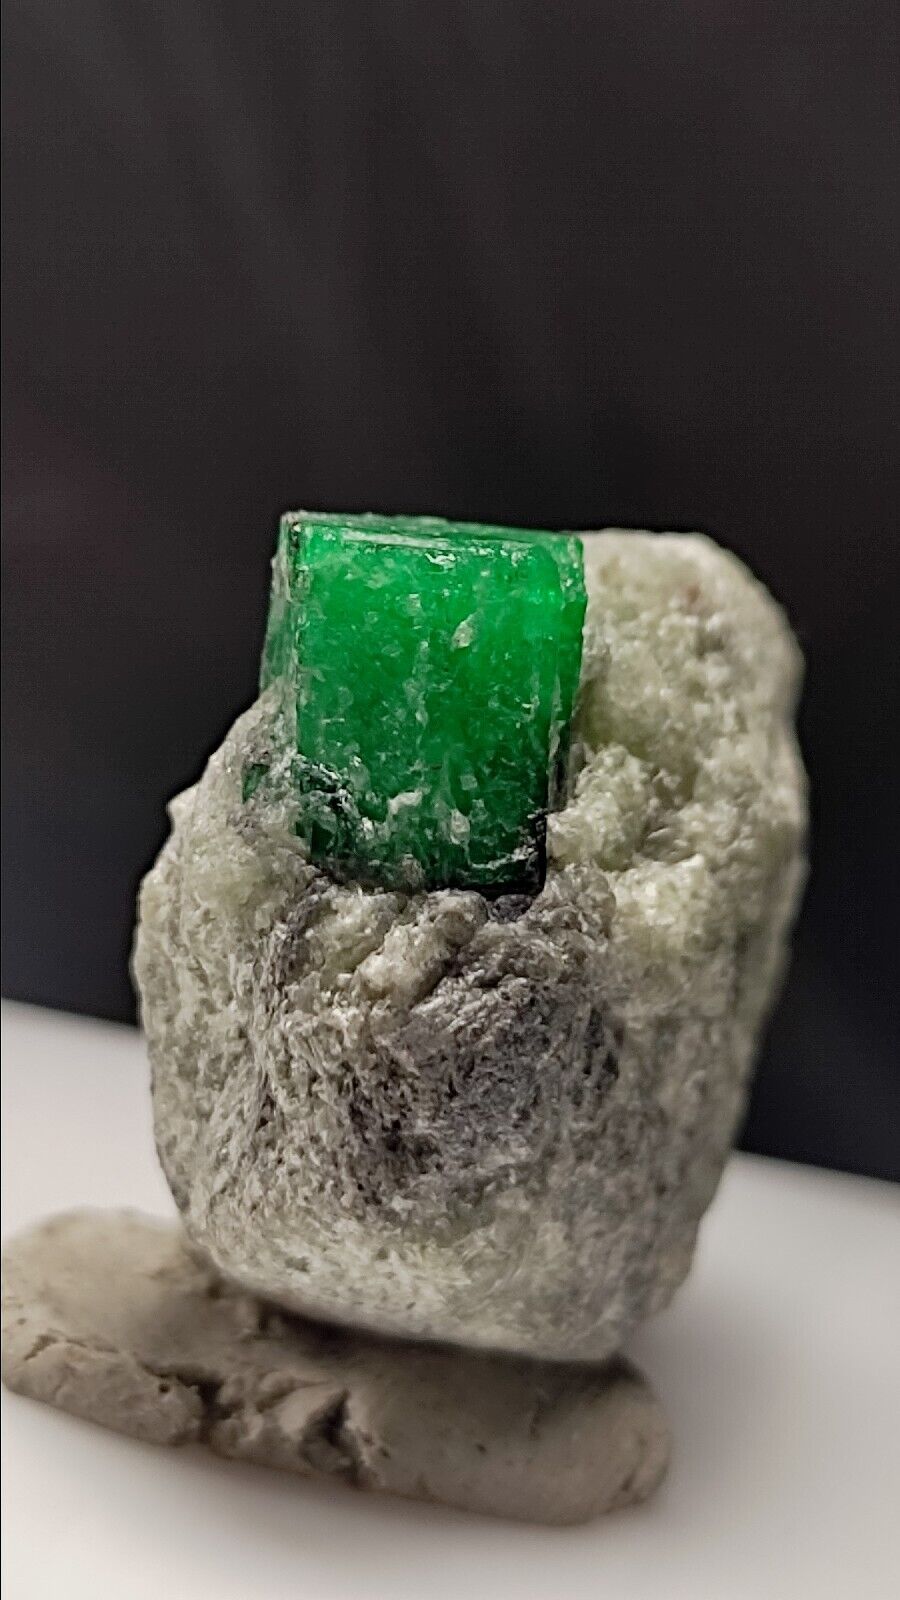 28gram Emerald crystal rough specimen collection peice from Swat Valley Pakistan